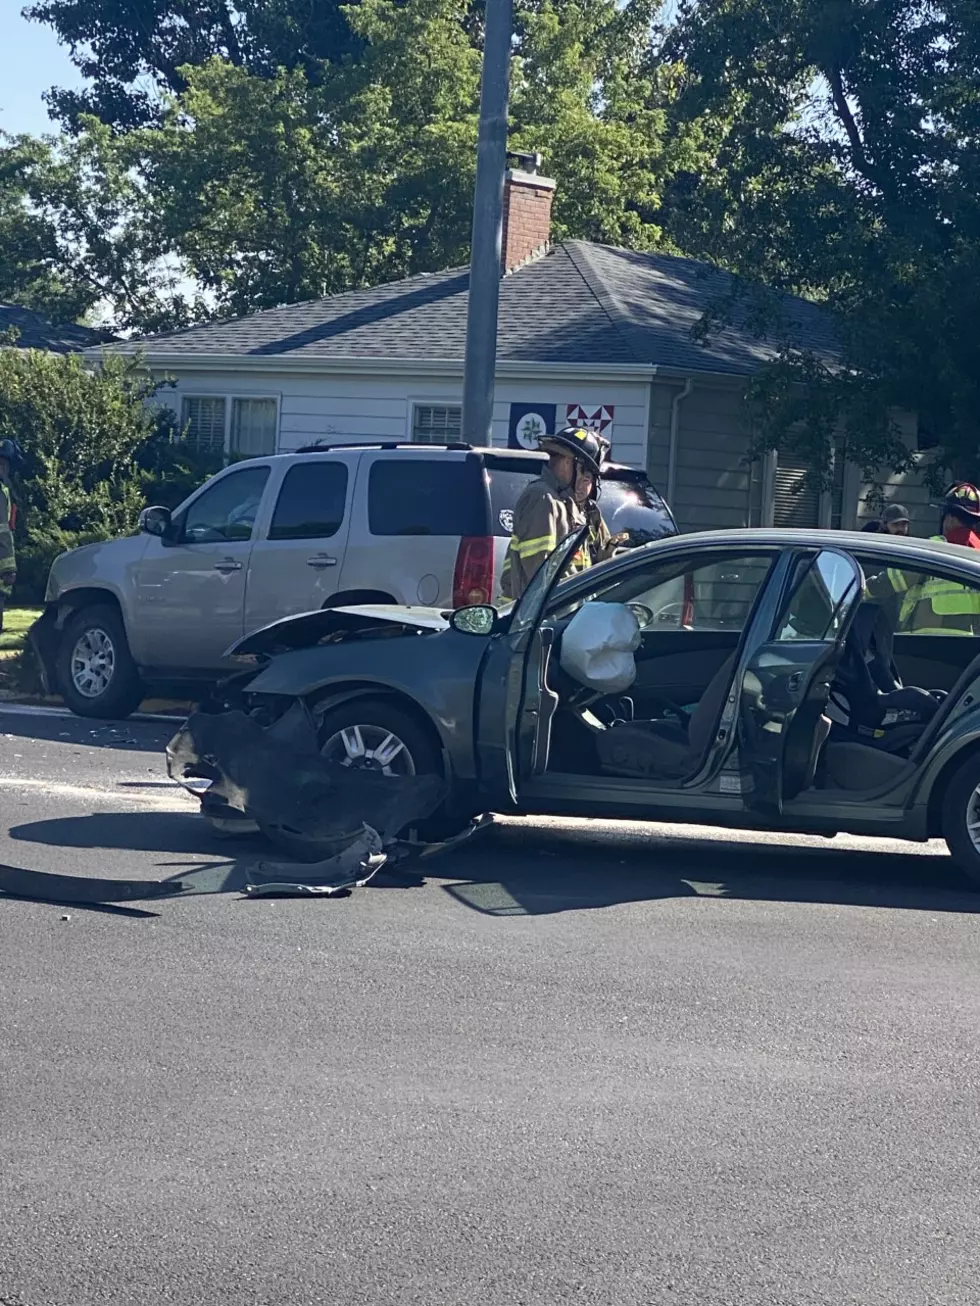 UPDATE: No injuries on Wolcott & 9th accident